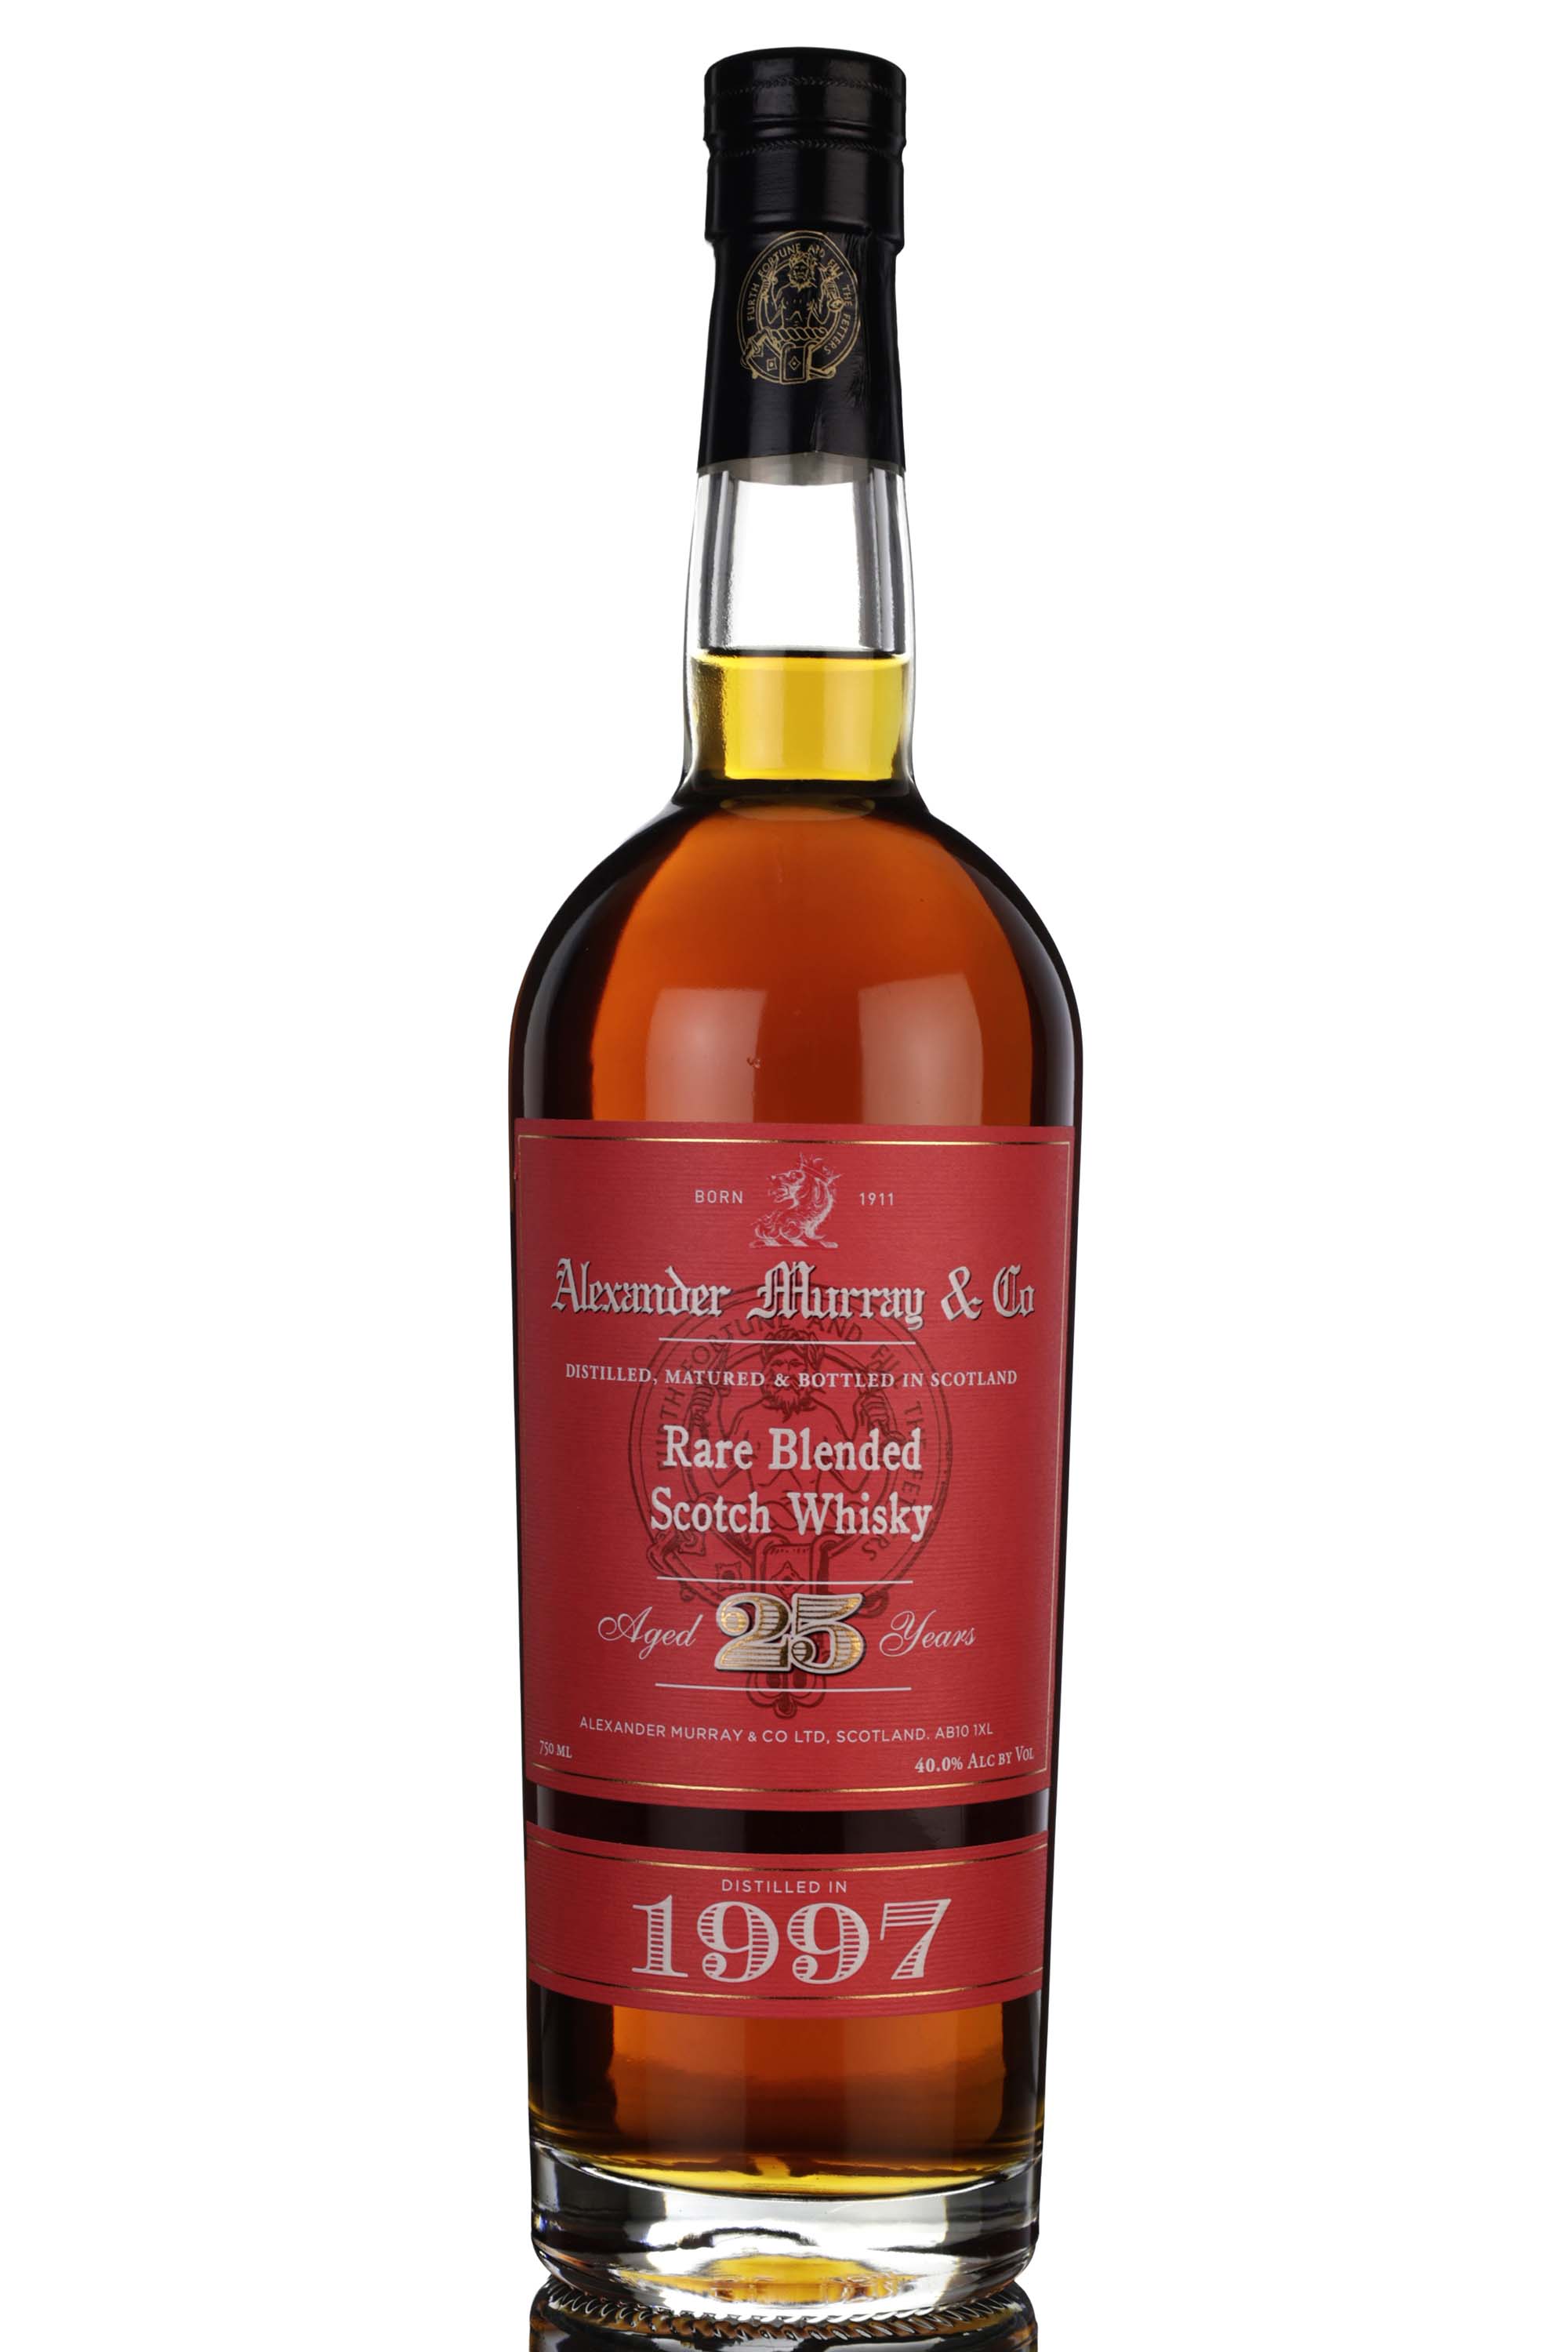 Rare Blended Scotch Whisky 1997 - 25 Year Old - Alexander Murray